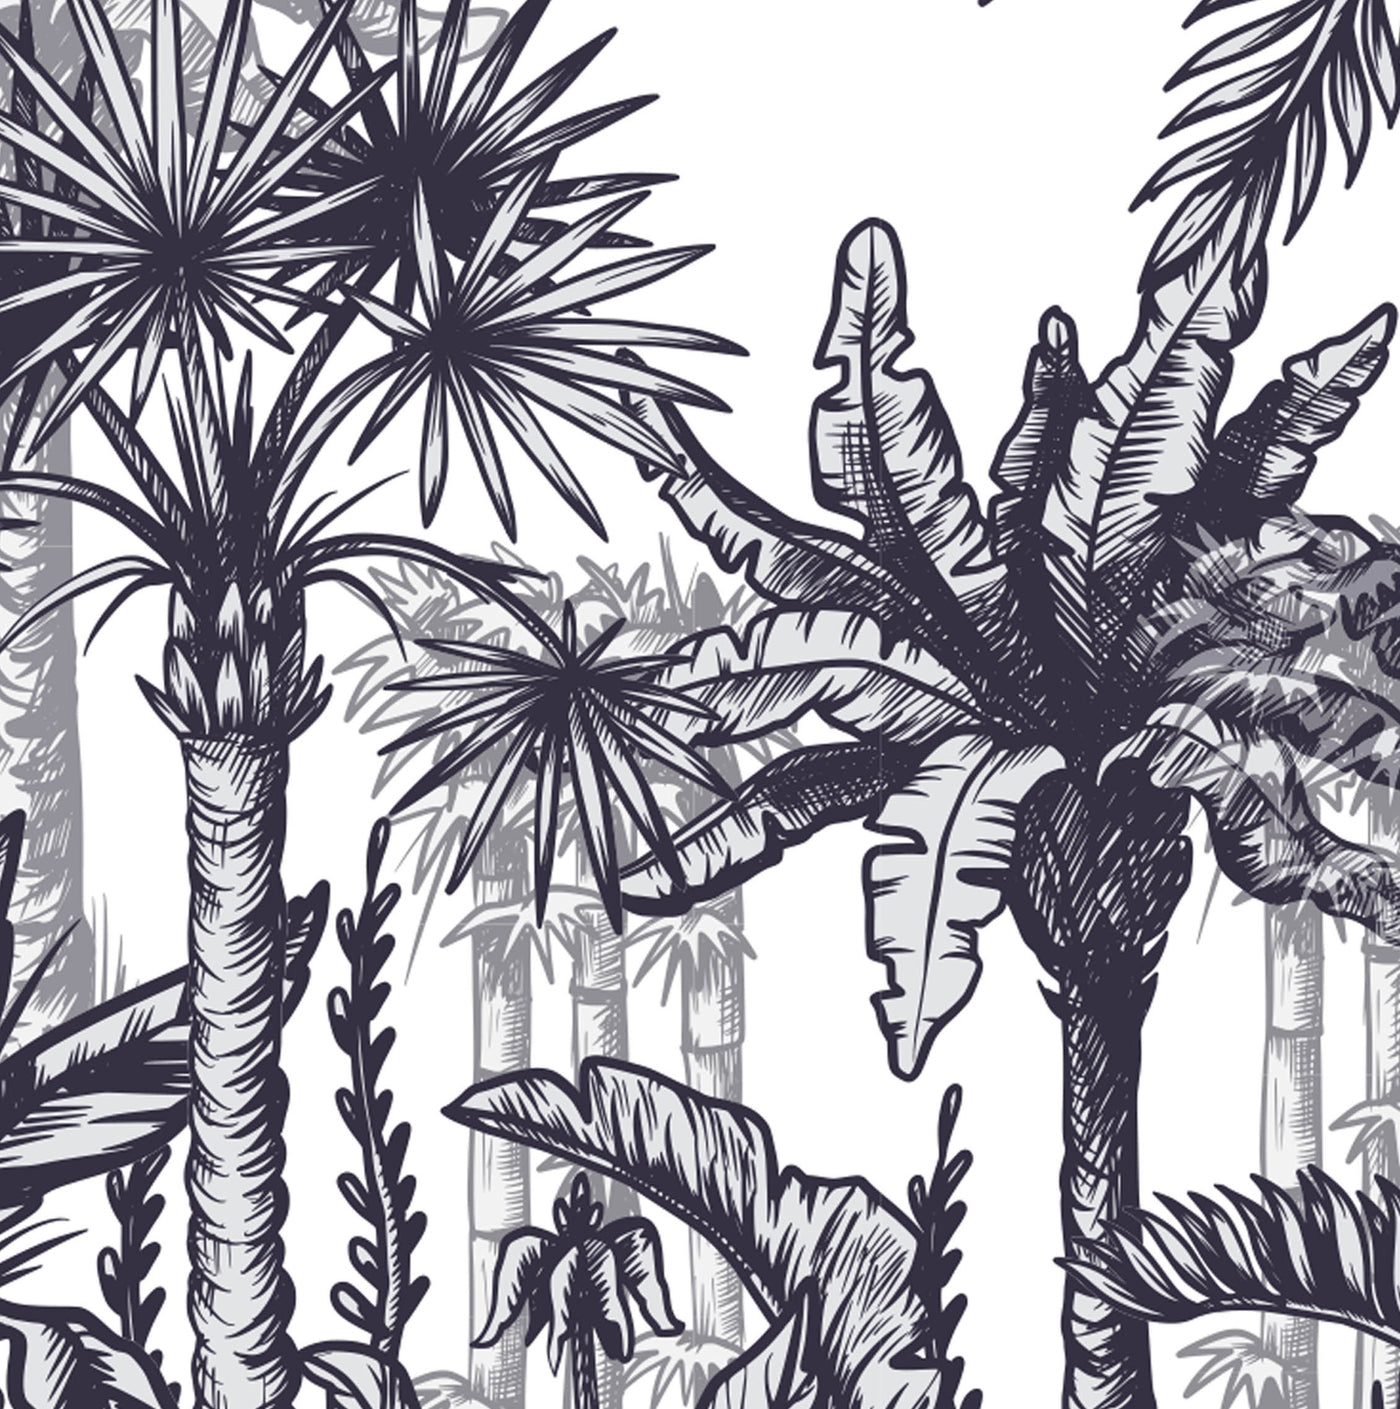 Black and White Palm Tree Mural Wallpaper (m²)-Wall Decor-BLACK & WHITE WALLPAPER, LEAF WALLPAPER, MURALS, MURALS / WALLPAPERS, NON-WOVEN WALLPAPER, PALM WALLPAPER, TROPICAL MURAL, TROPICAL WALLPAPERS-Forest Homes-Nature inspired decor-Nature decor